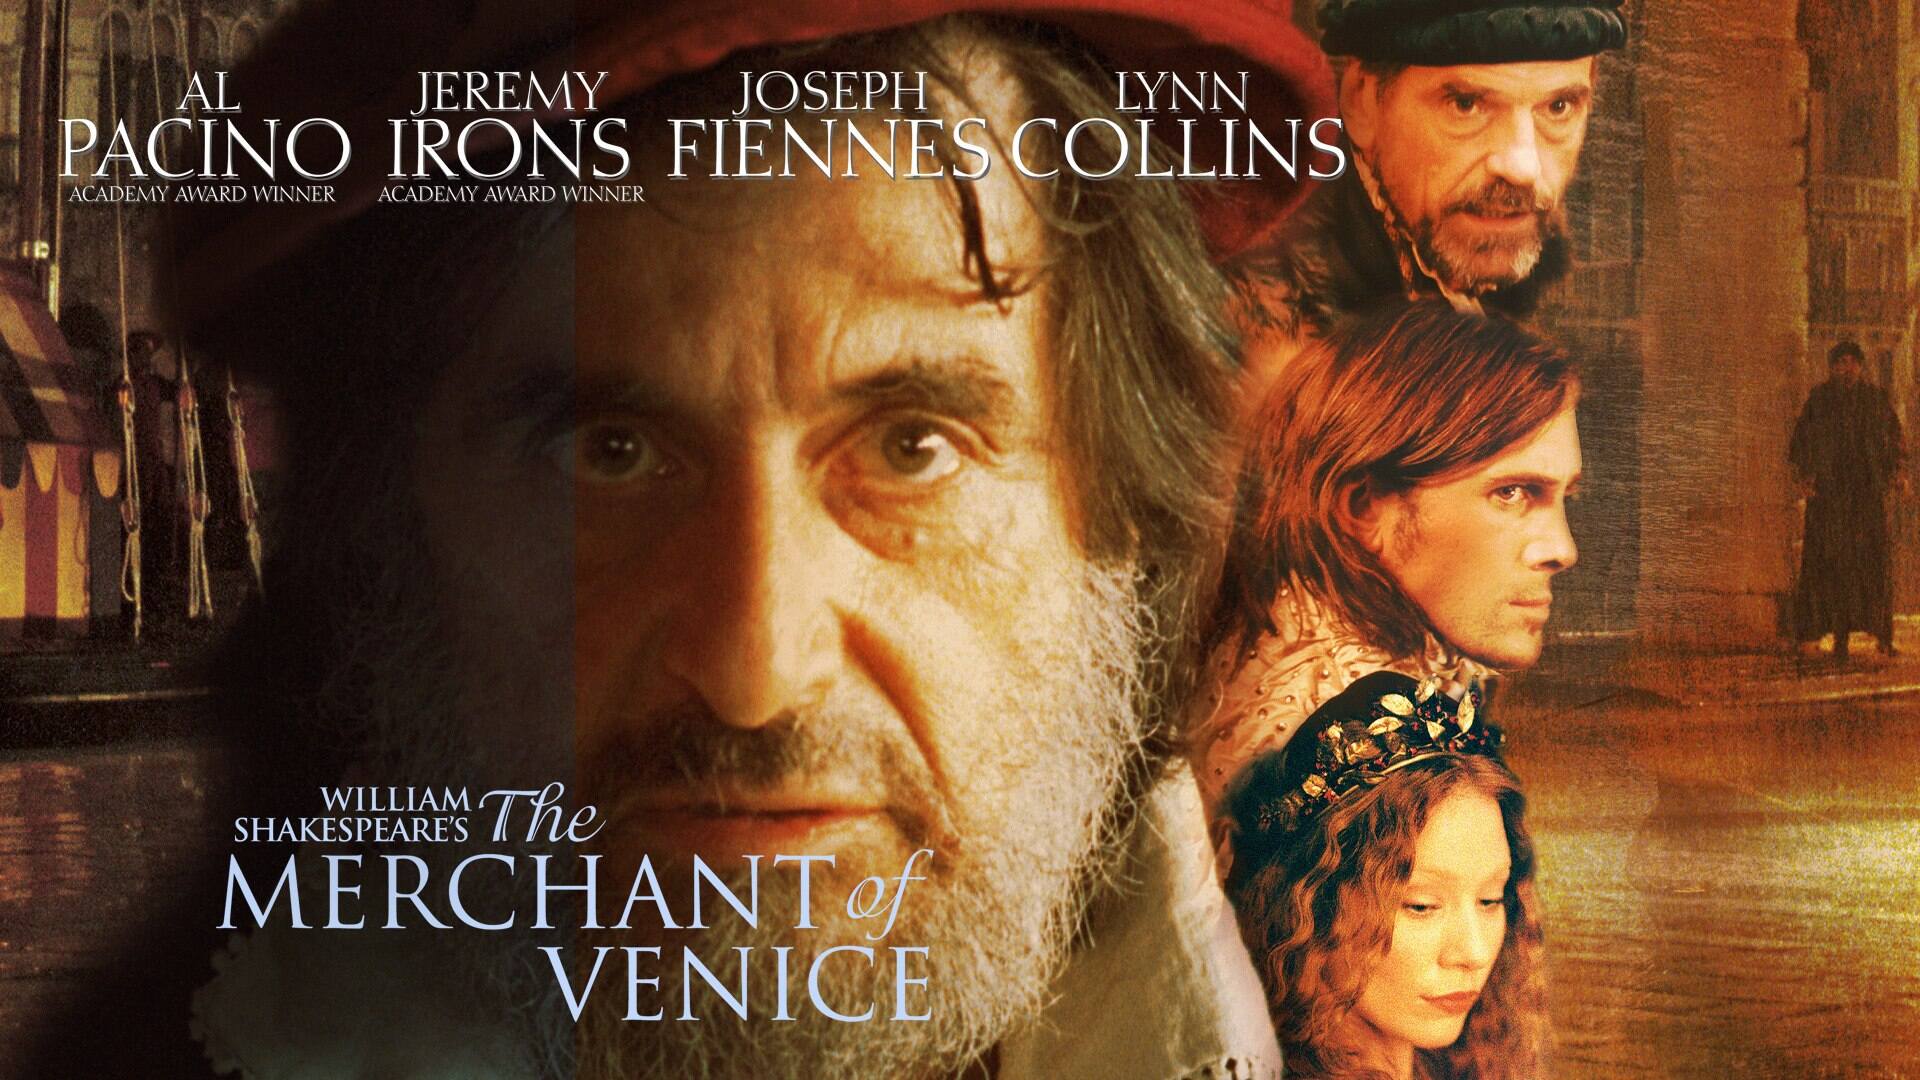 The Merchant of Venice - The Ring Episode - YouTube